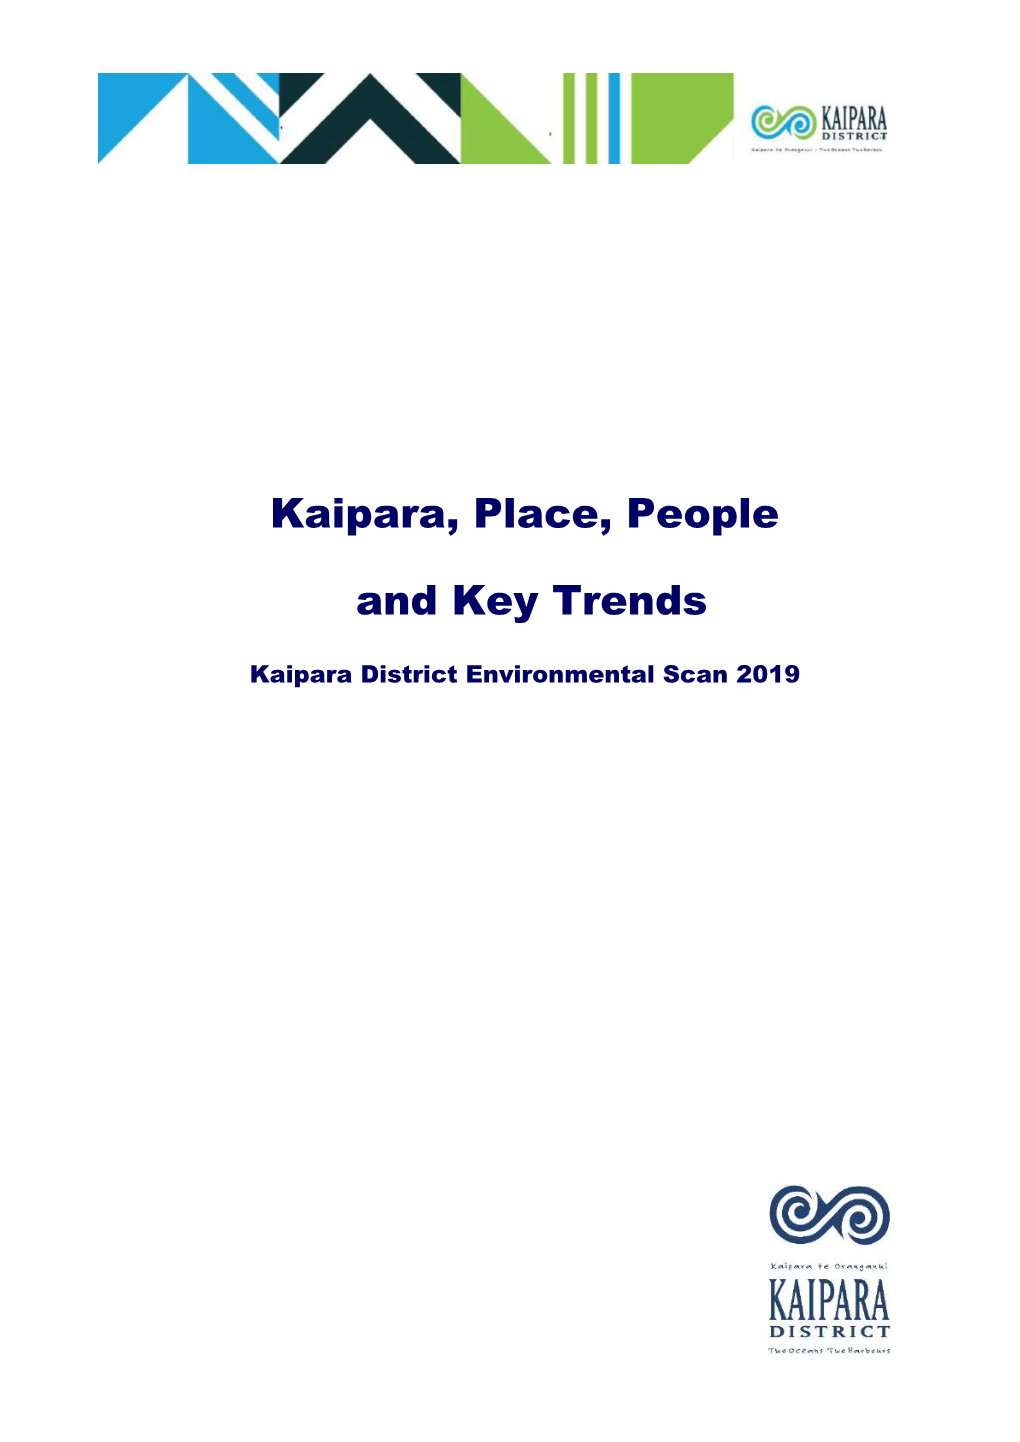 Kaipara, Place, People and Key Trends